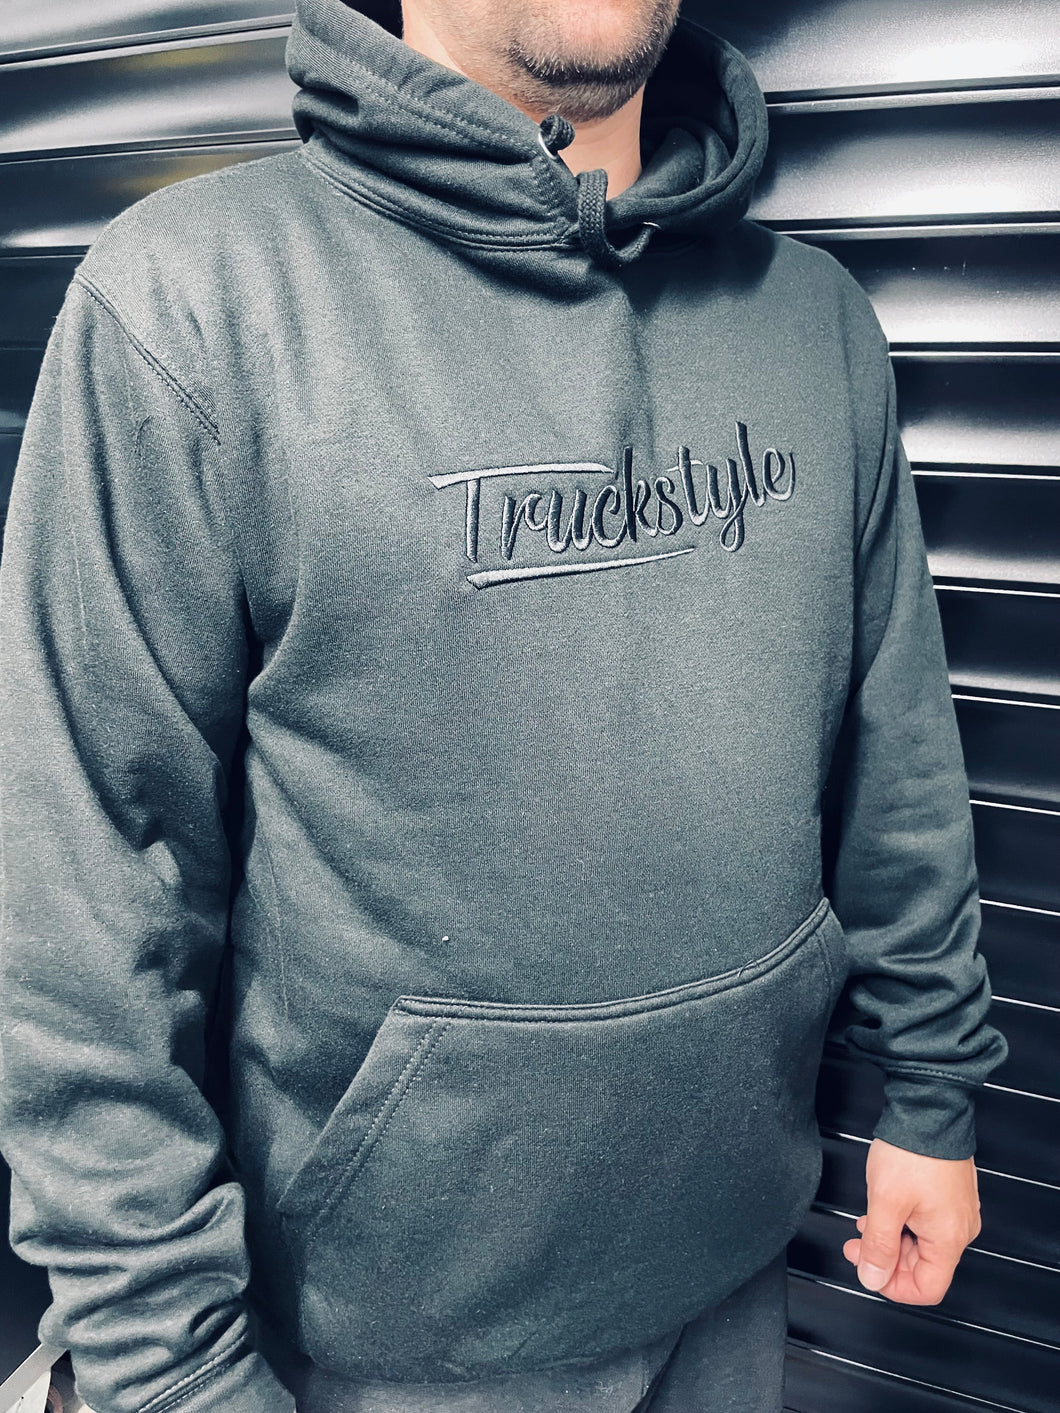 Truckstyle Embroidered Banner Hoody - Black Stitch